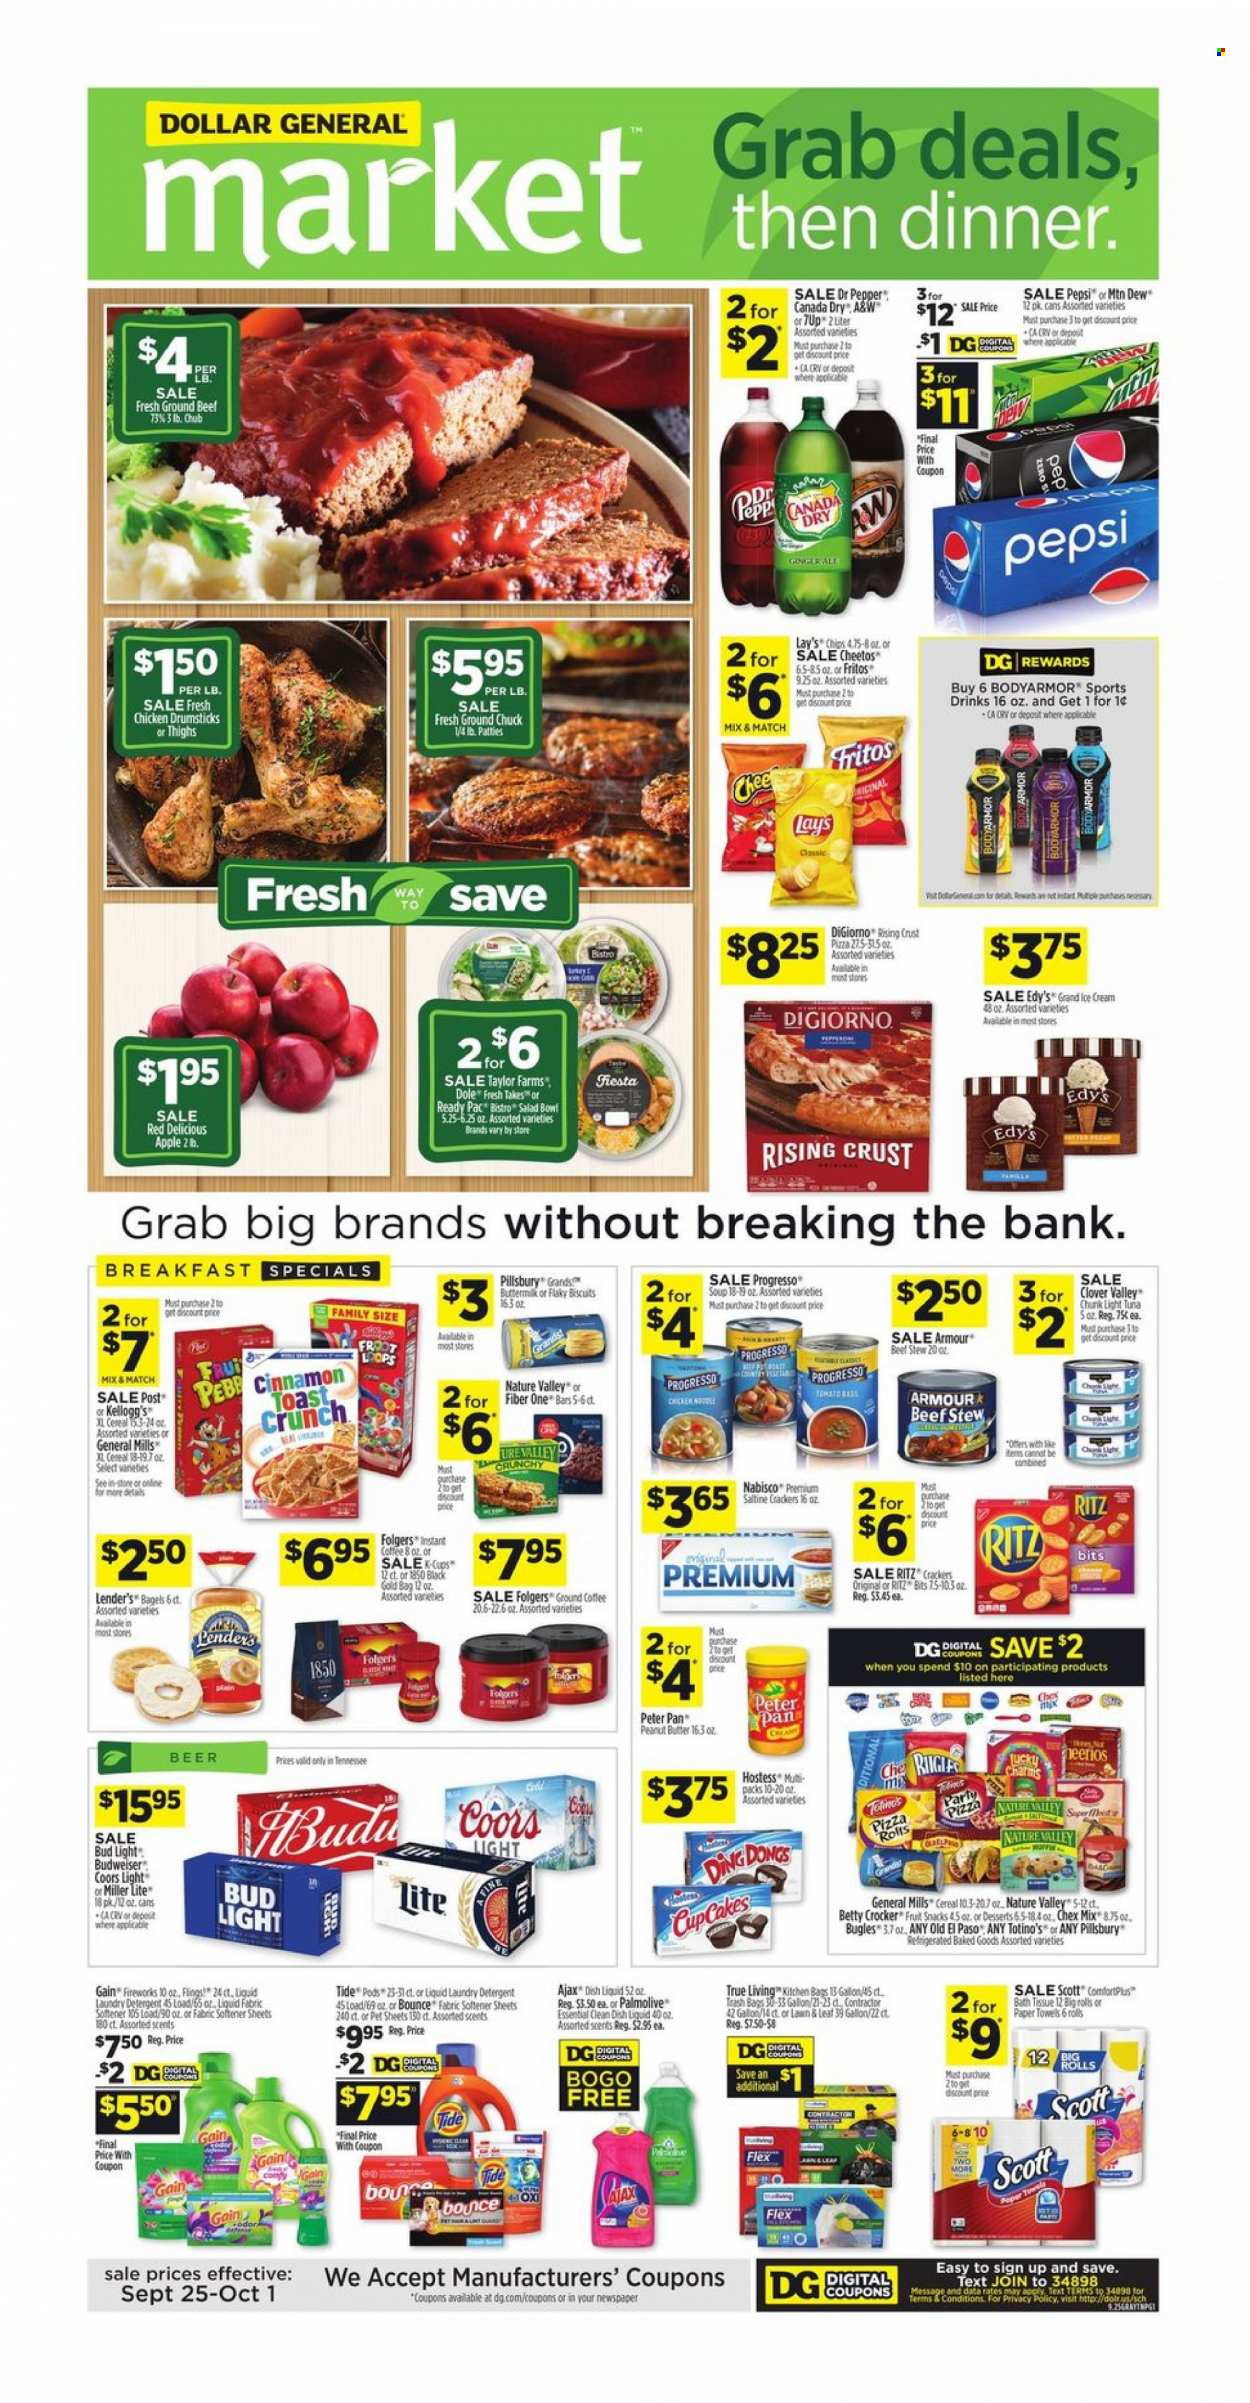 thumbnail - Dollar General Flyer - 09/25/2022 - 10/01/2022 - Sales products - Scott, bagels, Old El Paso, cupcake, Dole, Red Delicious apples, tuna, pizza, soup, Pillsbury, Progresso, Ready Pac, Clover, buttermilk, ice cream, crackers, Kellogg's, biscuit, fruit snack, RITZ, Fritos, chips, Lay’s, Chex Mix, light tuna, cereals, Nature Valley, cinnamon, peanut butter, Mountain Dew, Pepsi, Dr. Pepper, 7UP, instant coffee, Folgers, ground coffee, beer, Bud Light, chicken drumsticks, beef meat, ground beef, ground chuck, bath tissue, kitchen towels, paper towels, detergent, Gain, Ajax, Tide, fabric softener, laundry detergent, Bounce, Gain Fireworks, dishwashing liquid, Palmolive, trash bags, pan, cup, salad bowl, bowl, Budweiser, Miller Lite, Coors. Page 1.